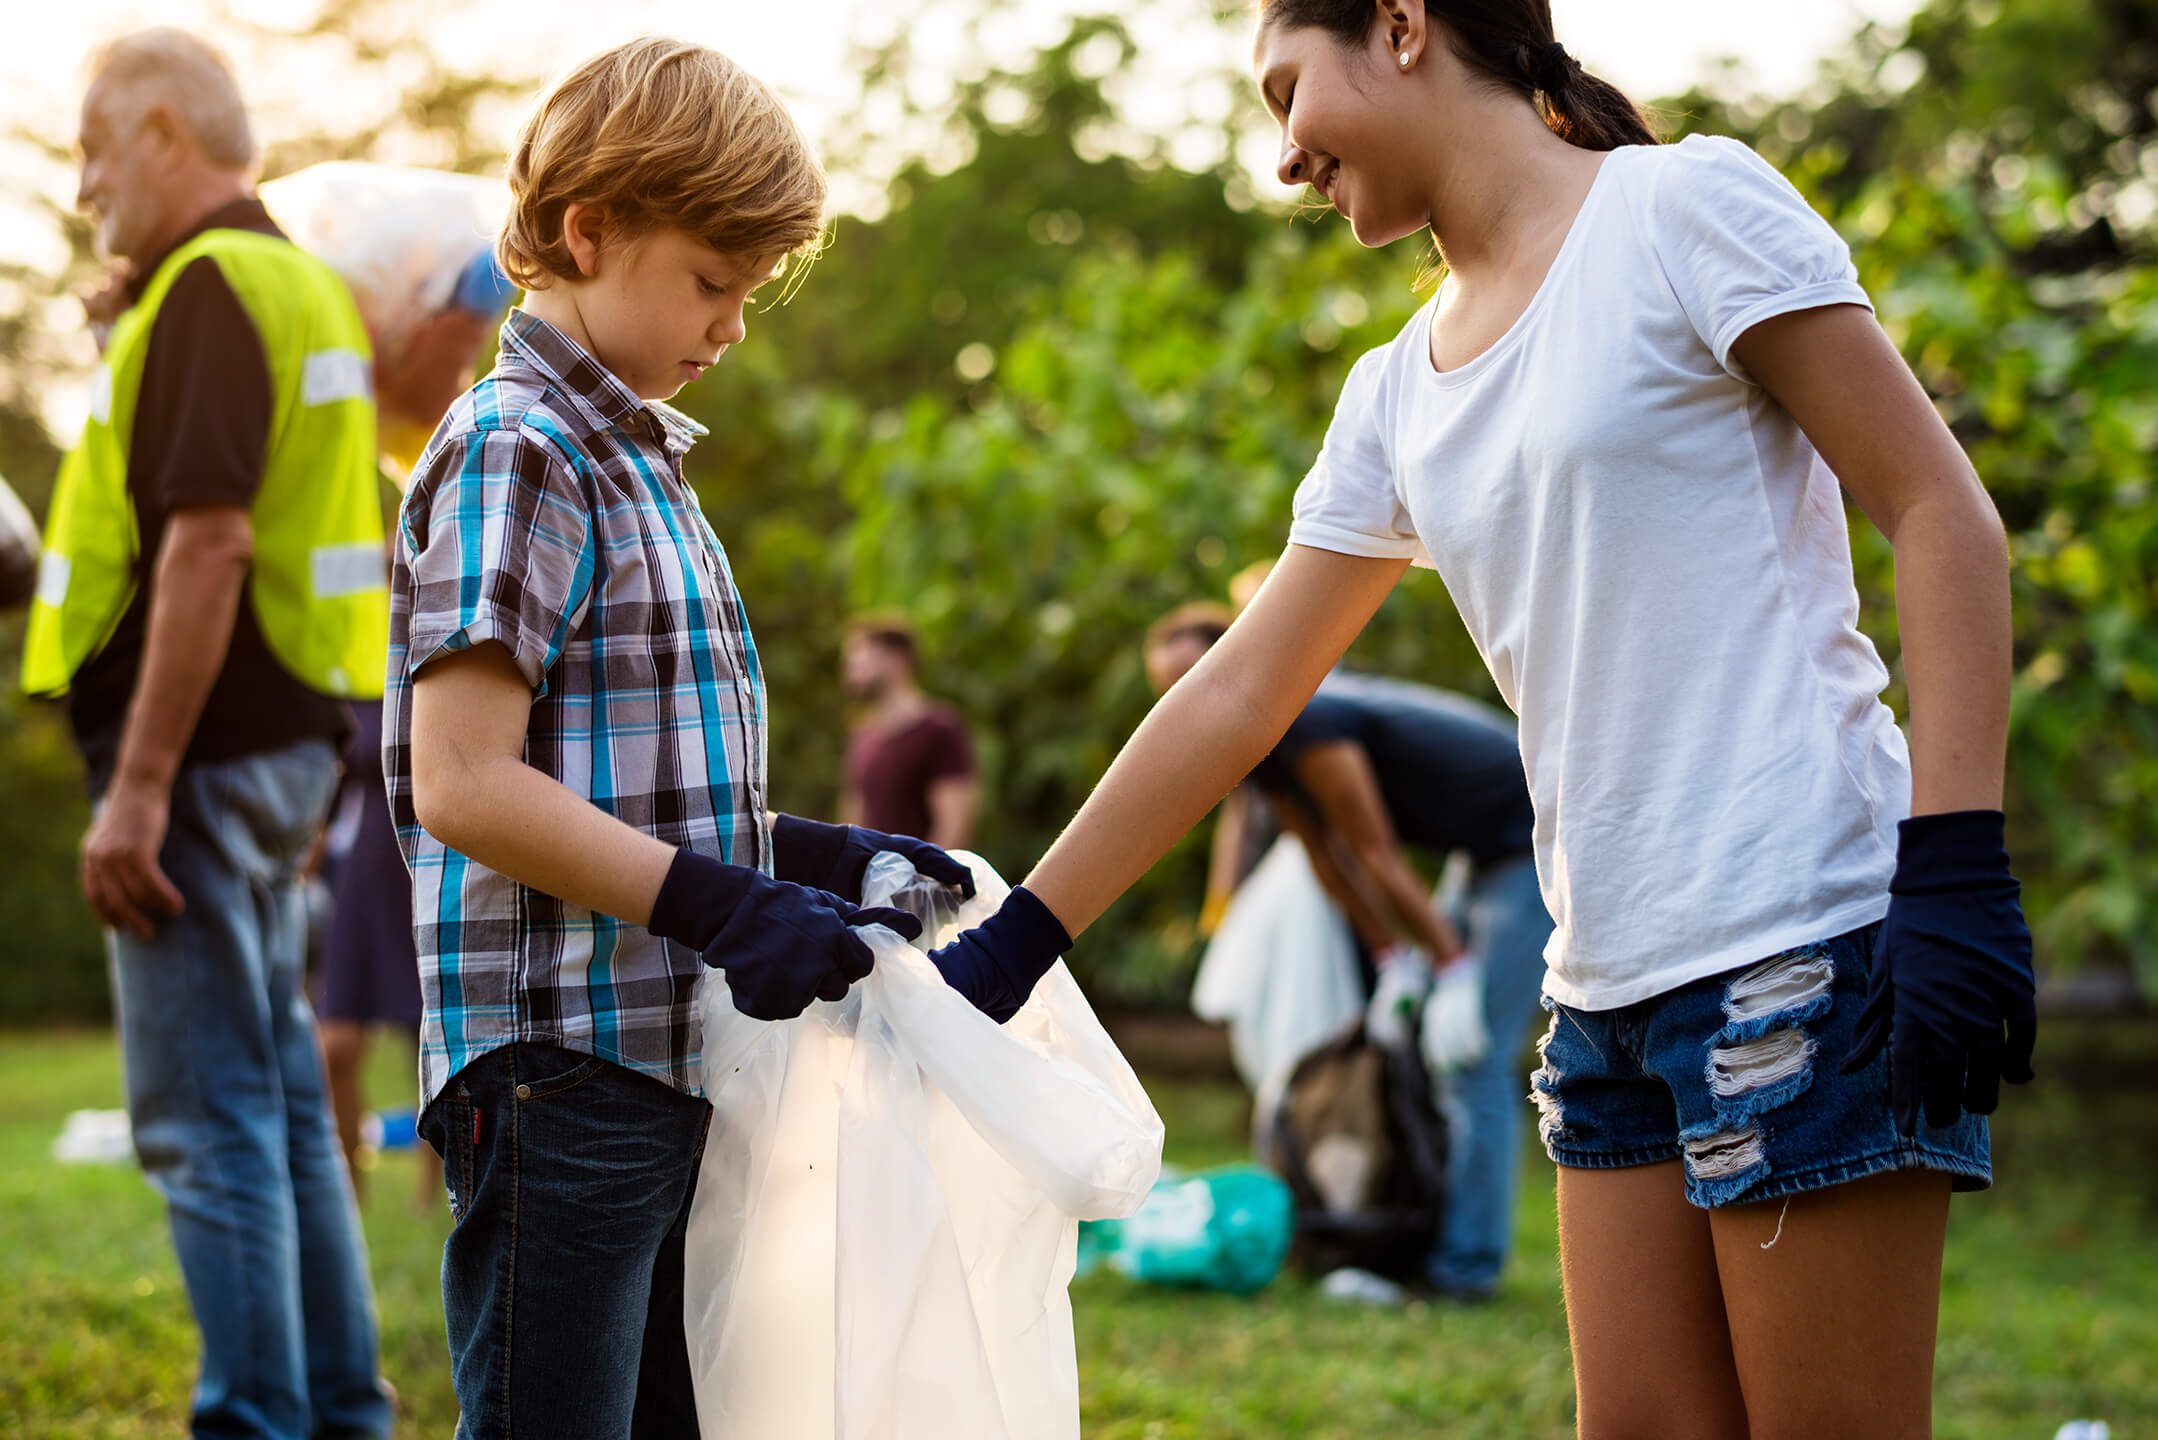 A girl putting trash into a trash bag being held by a boy